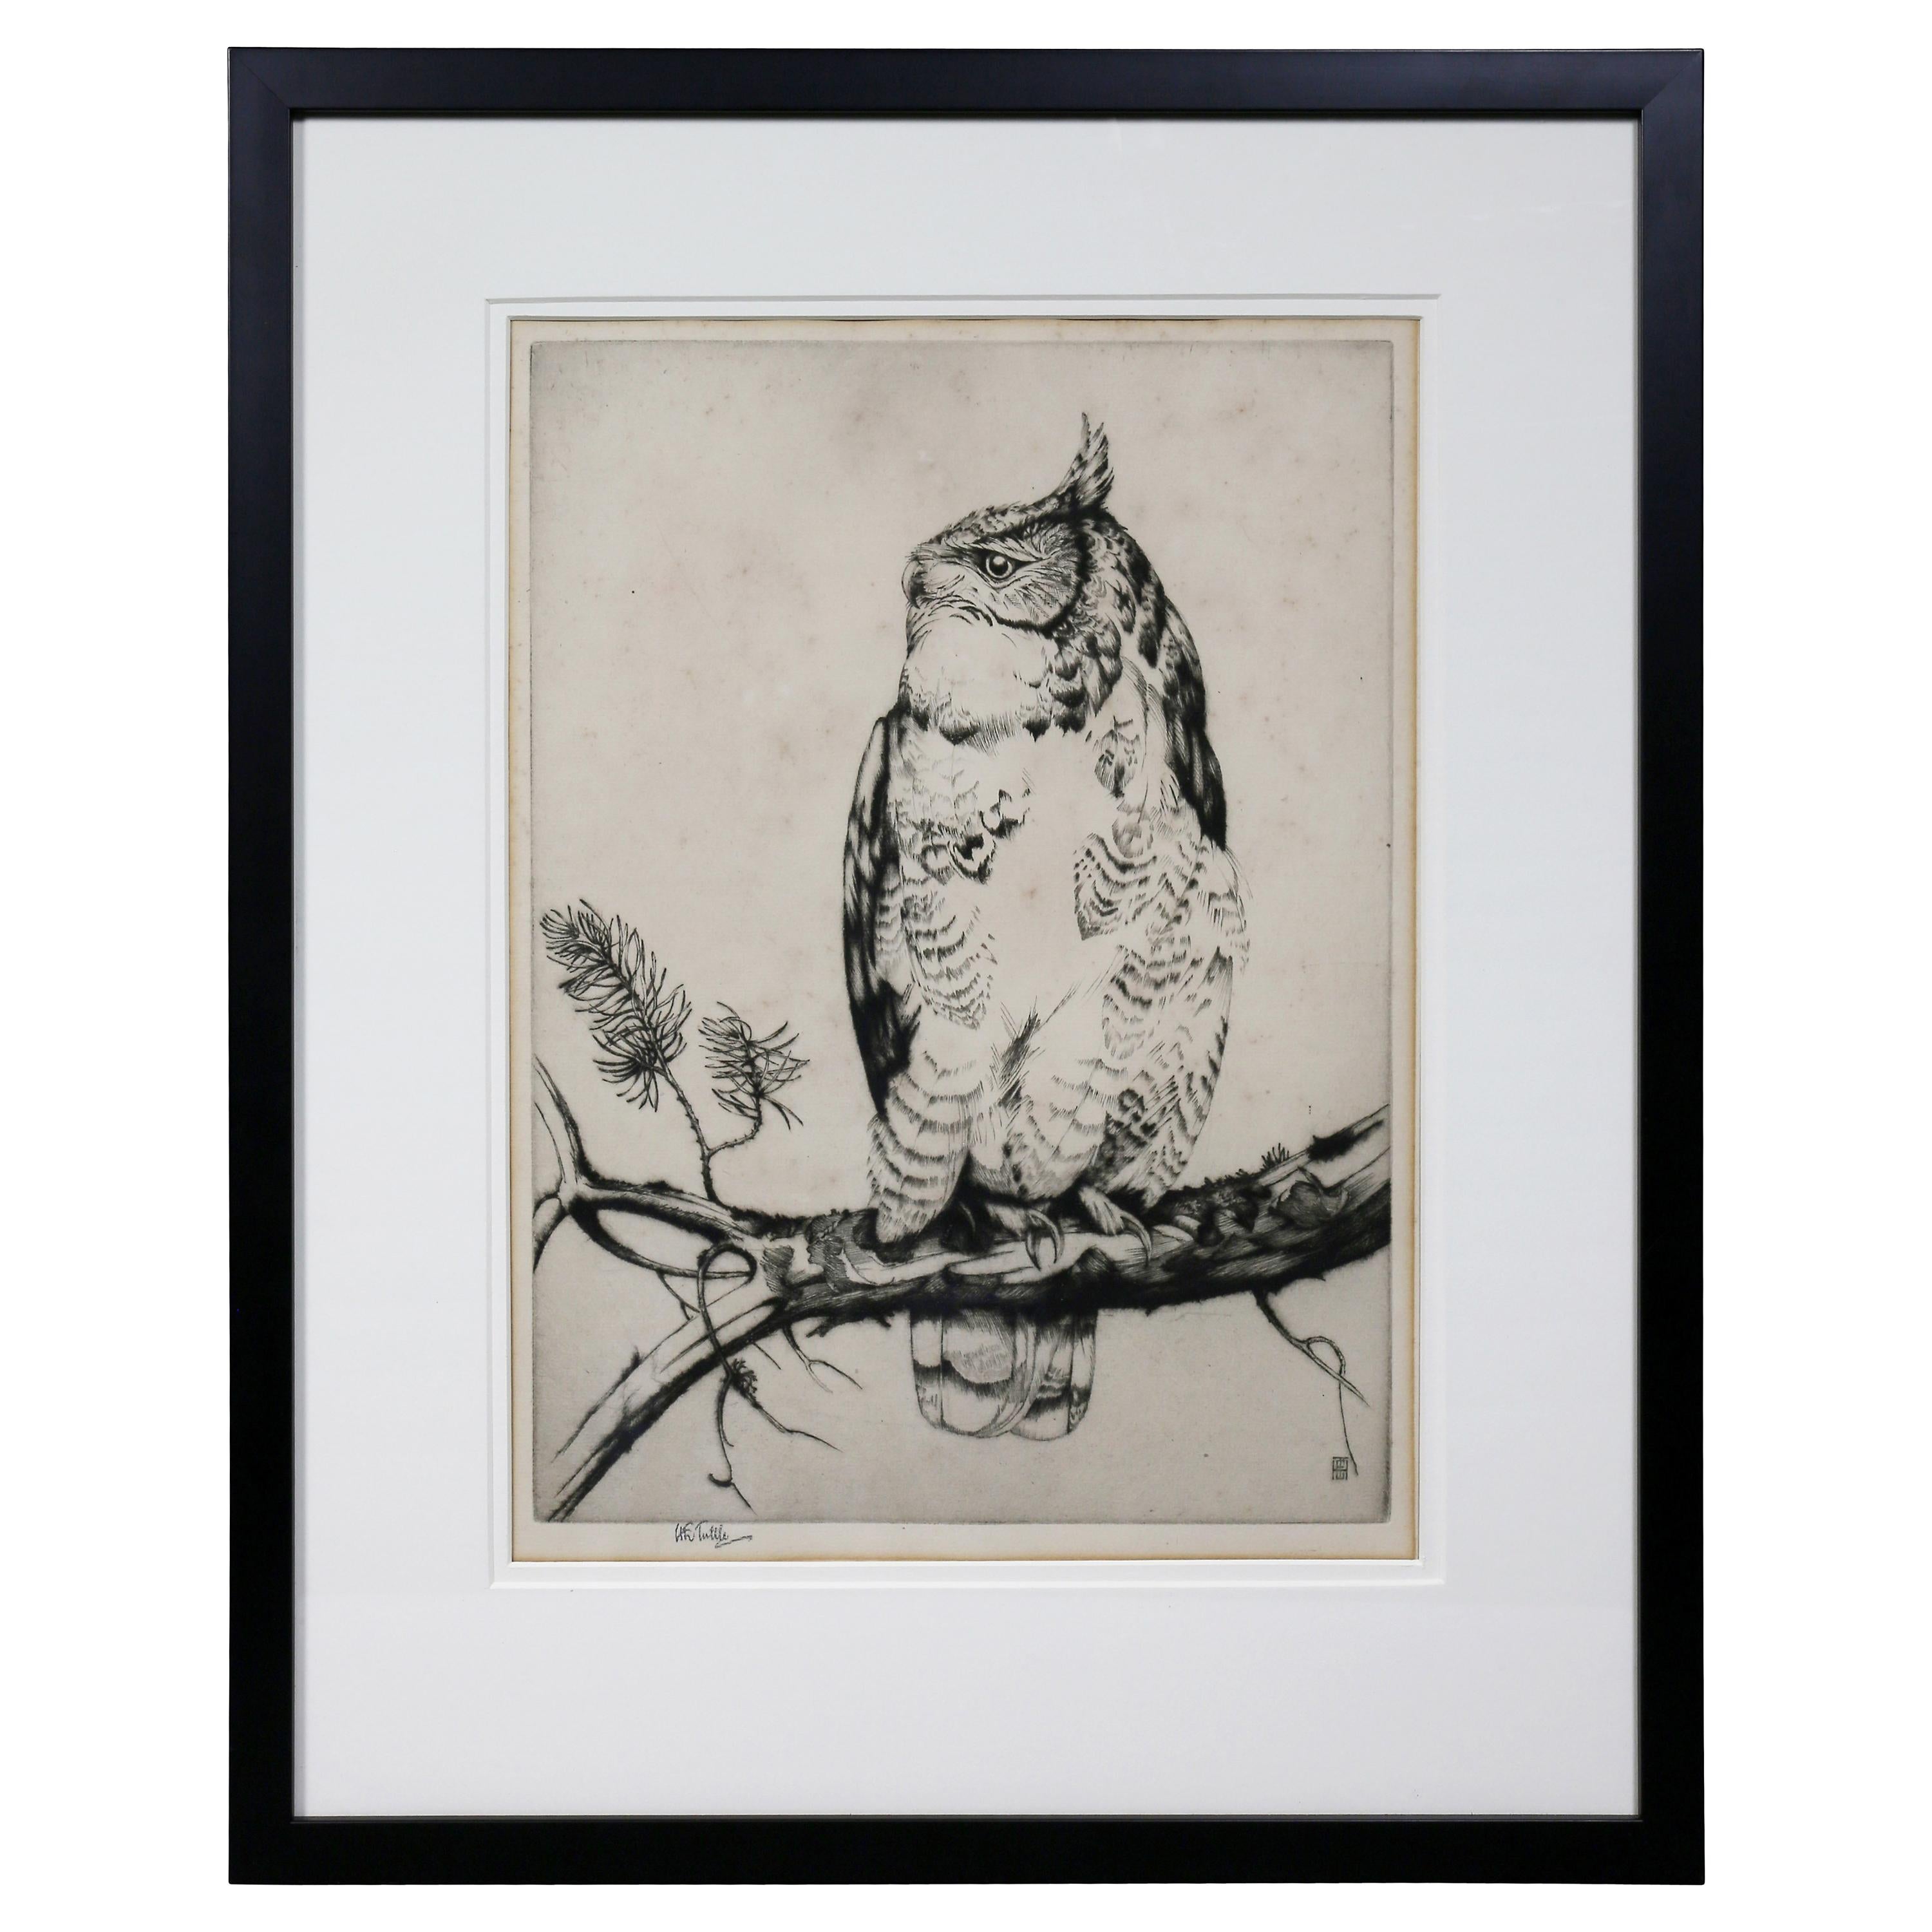 Framed Etching of an Owl by Henry Emerson Tuttle